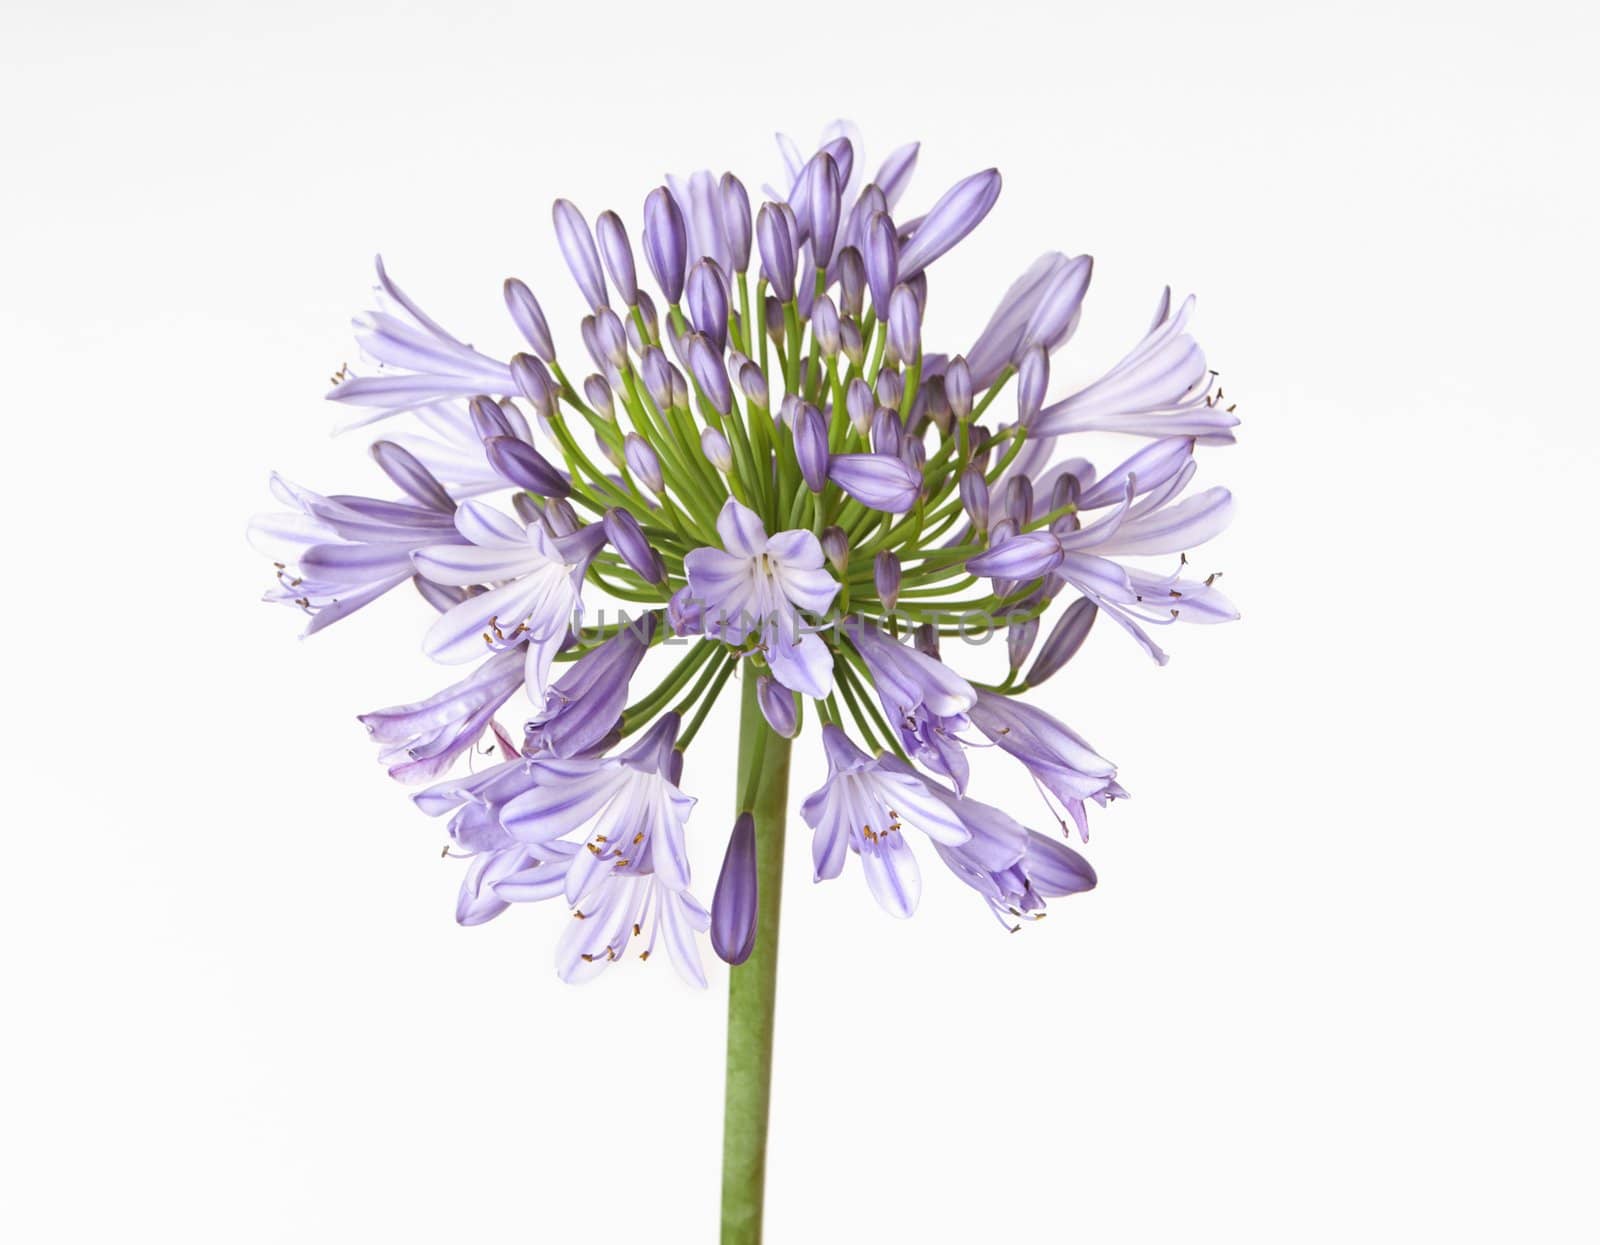 Agapanthus showing buds and flowers.  Colours range from shades of blue to purple or white. Agapanthus  is also known as African Lily